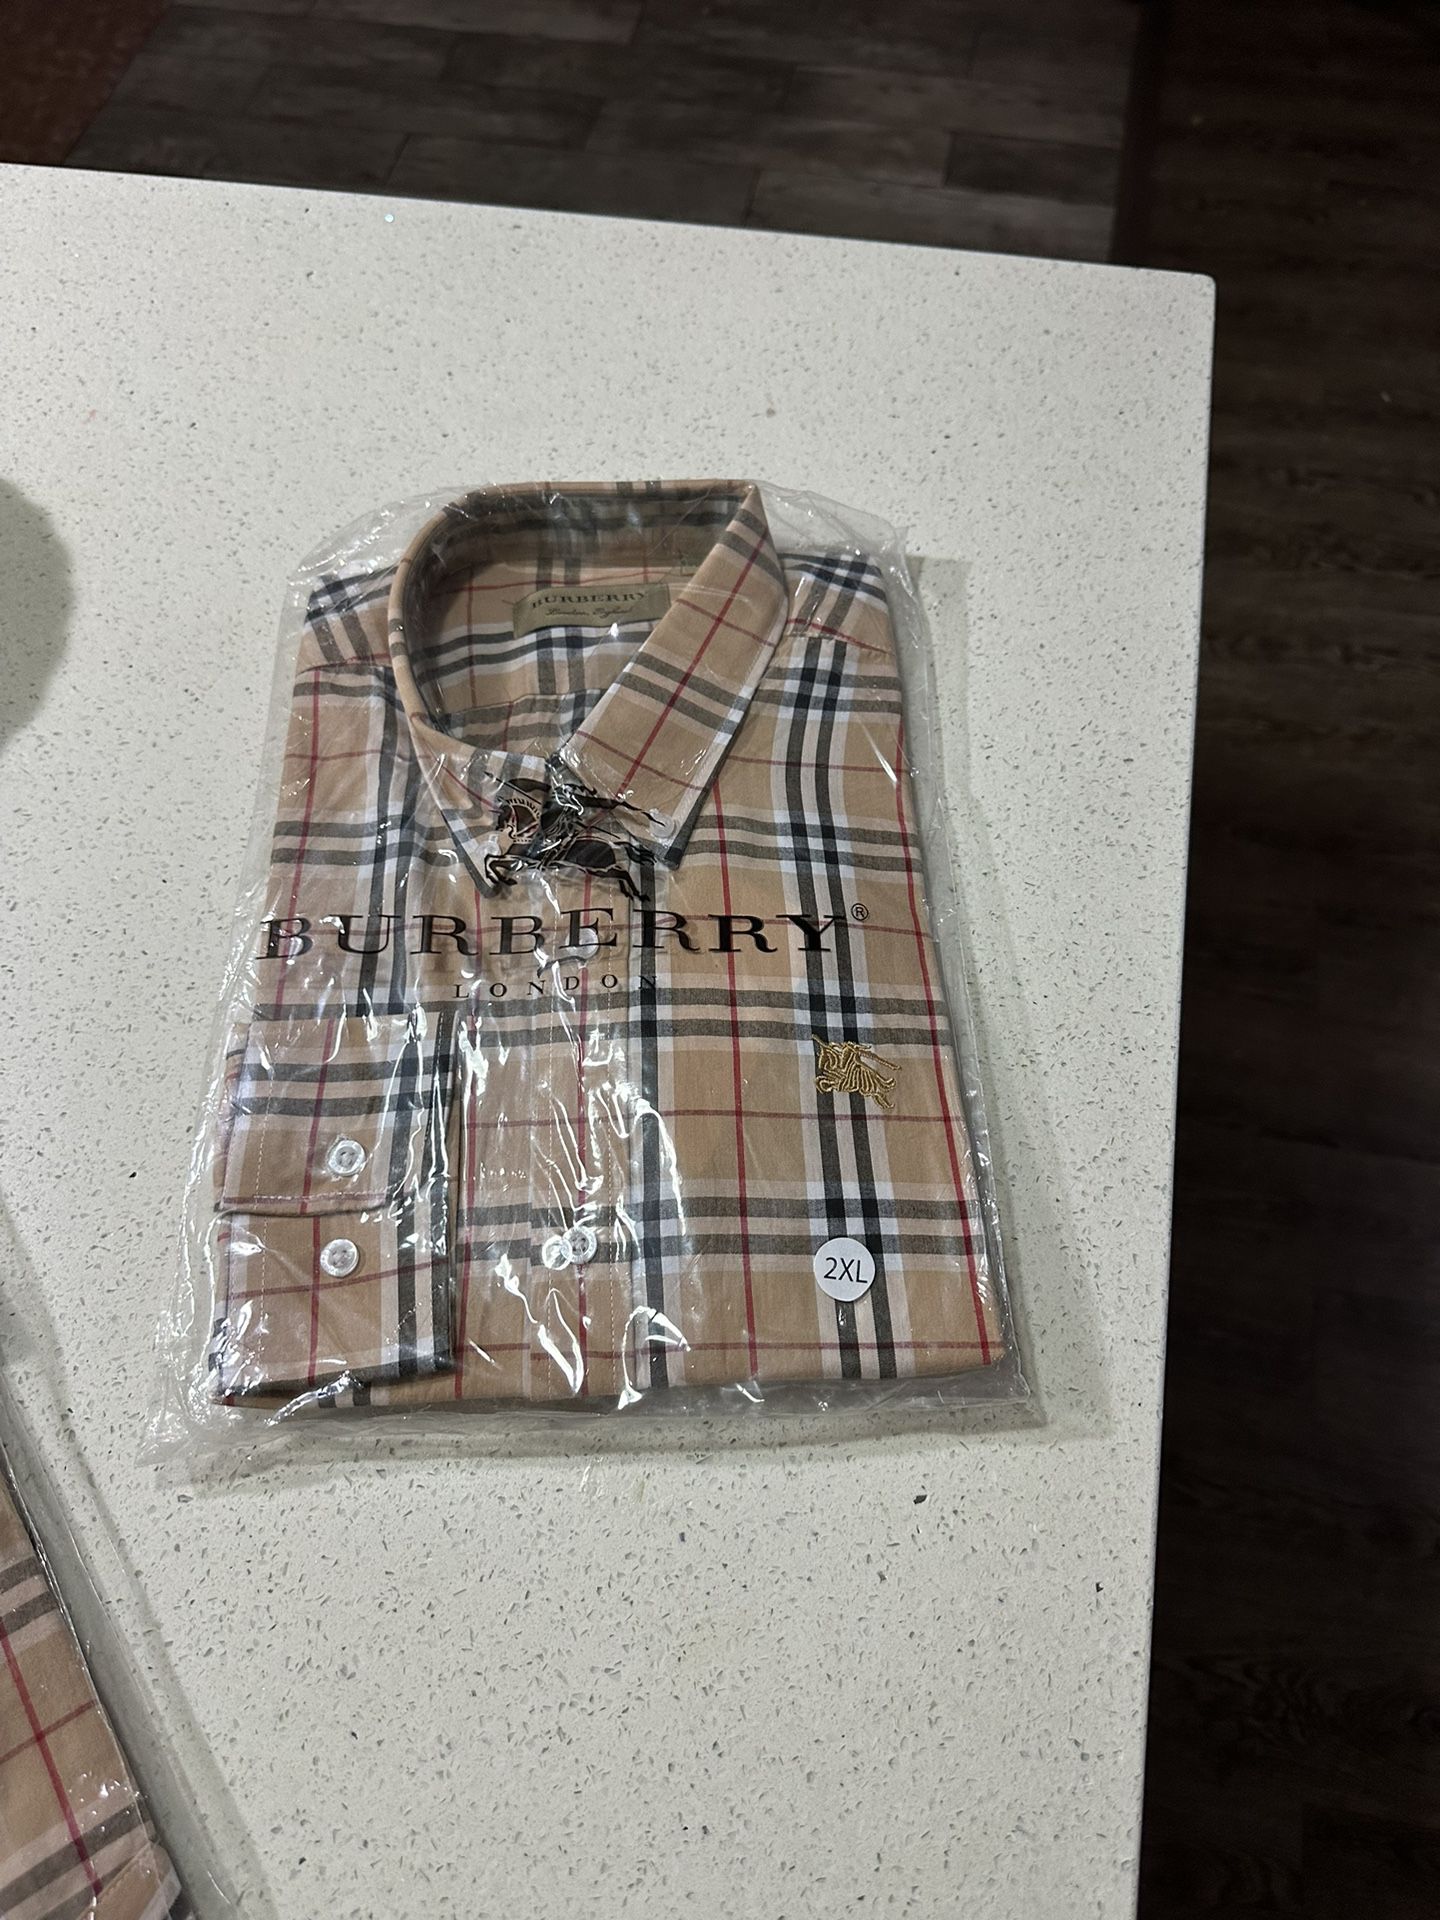 Need help! Is this Burberry shirt fake!